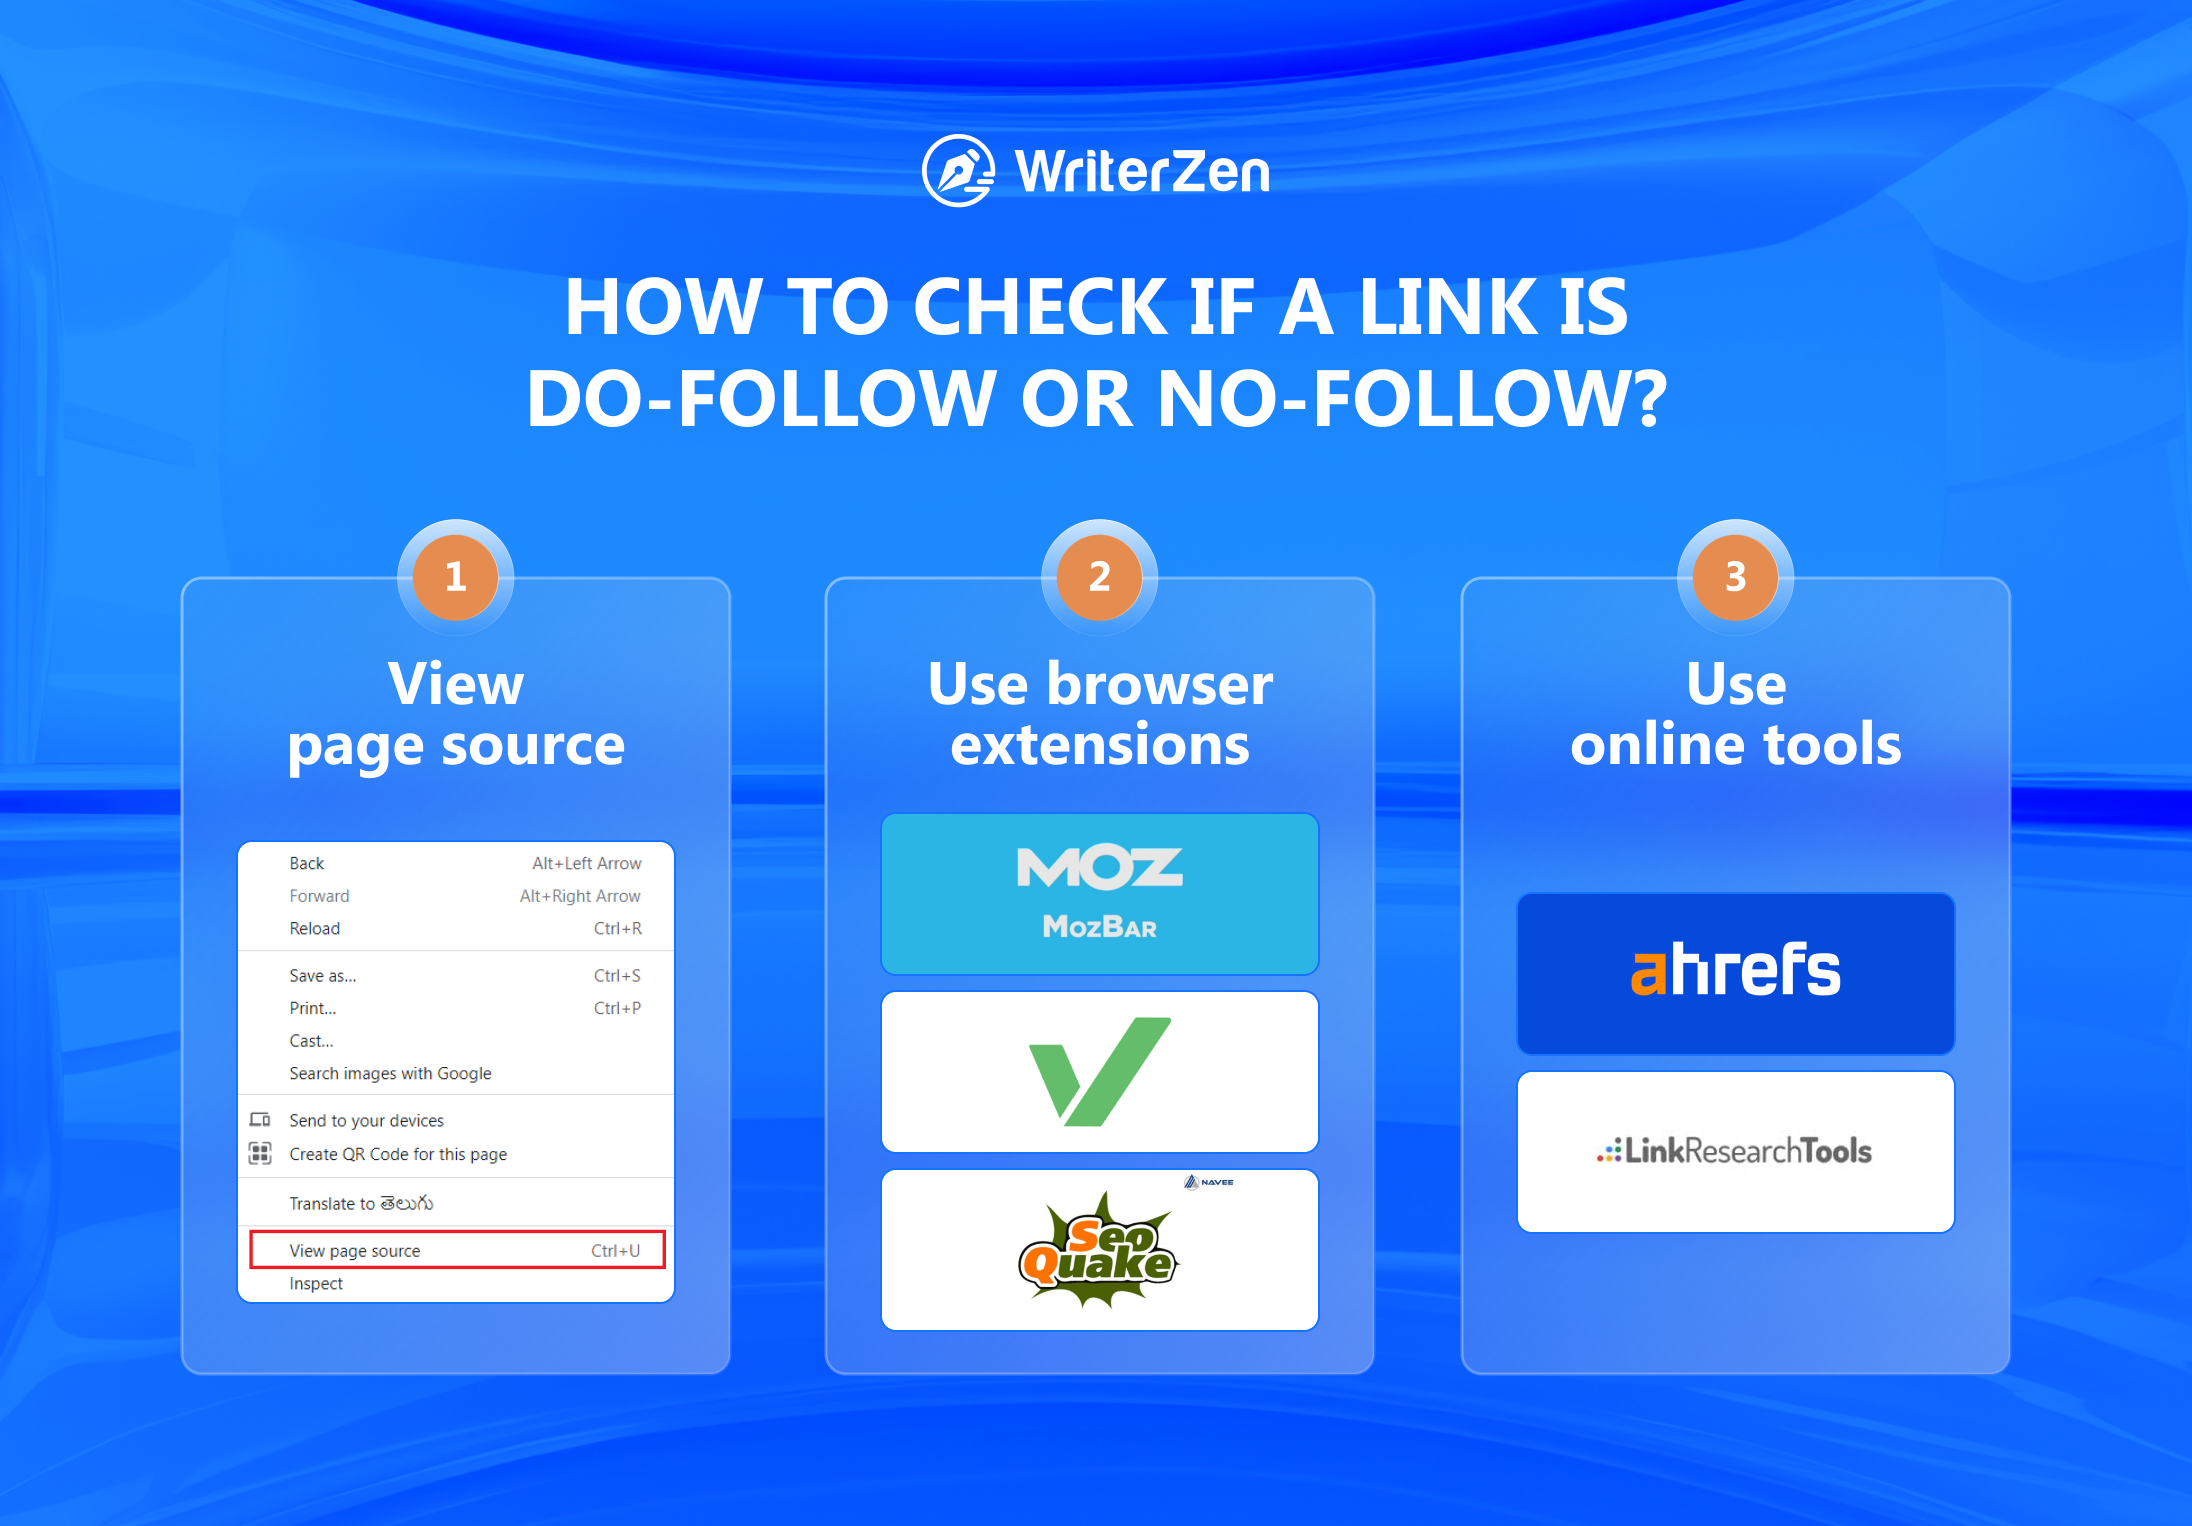 How to Check If a Link Is Do-follow or No-follow